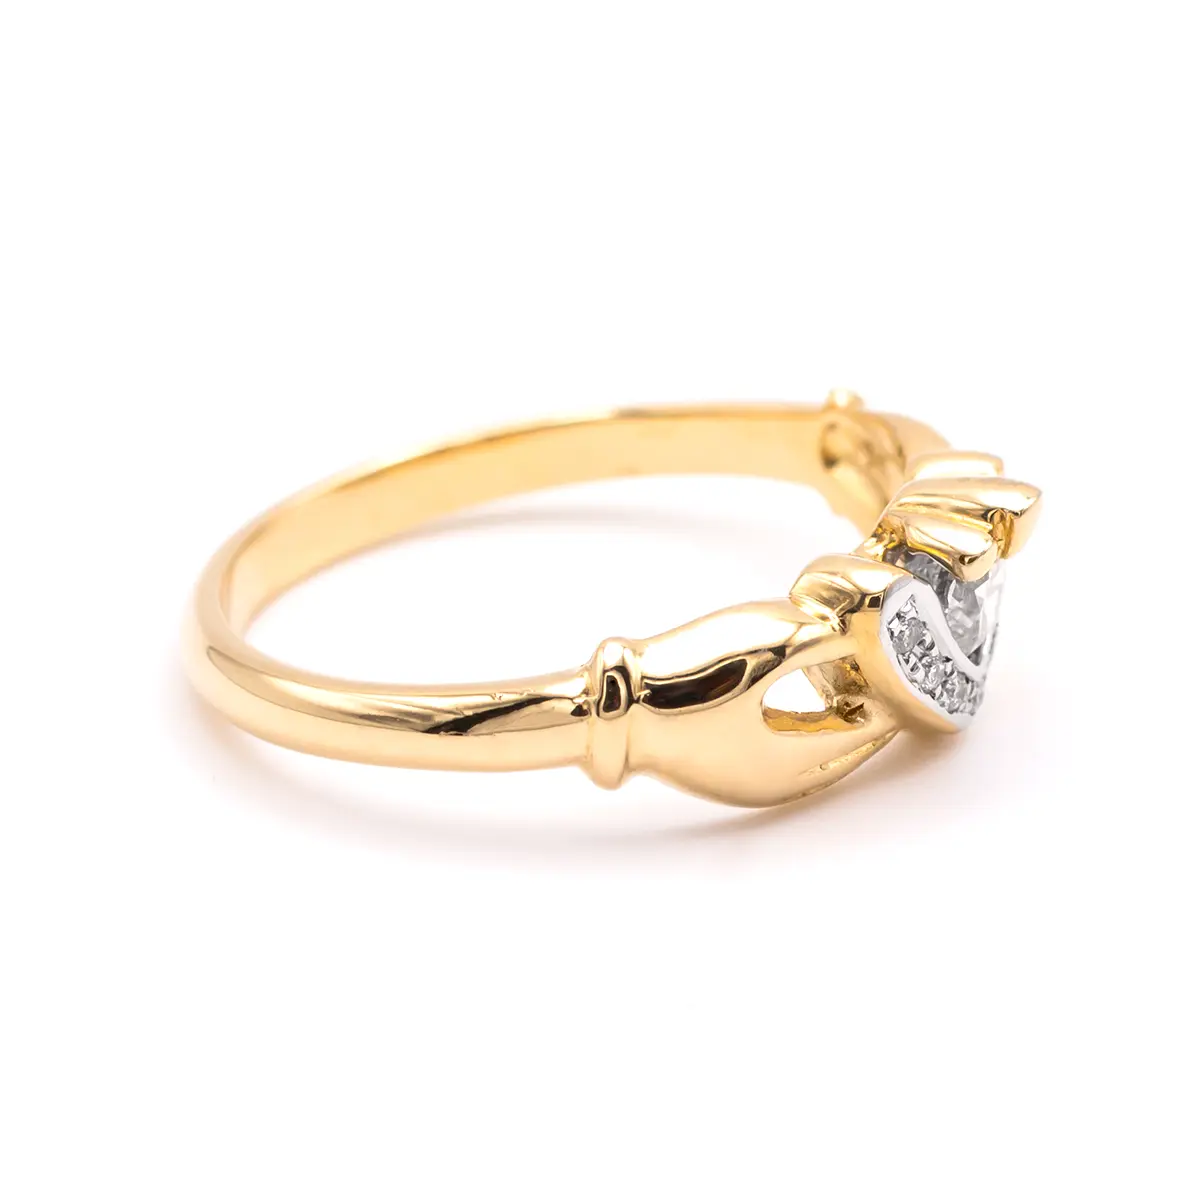 Ladies 14k Gold Claddagh Ring with Diamonds